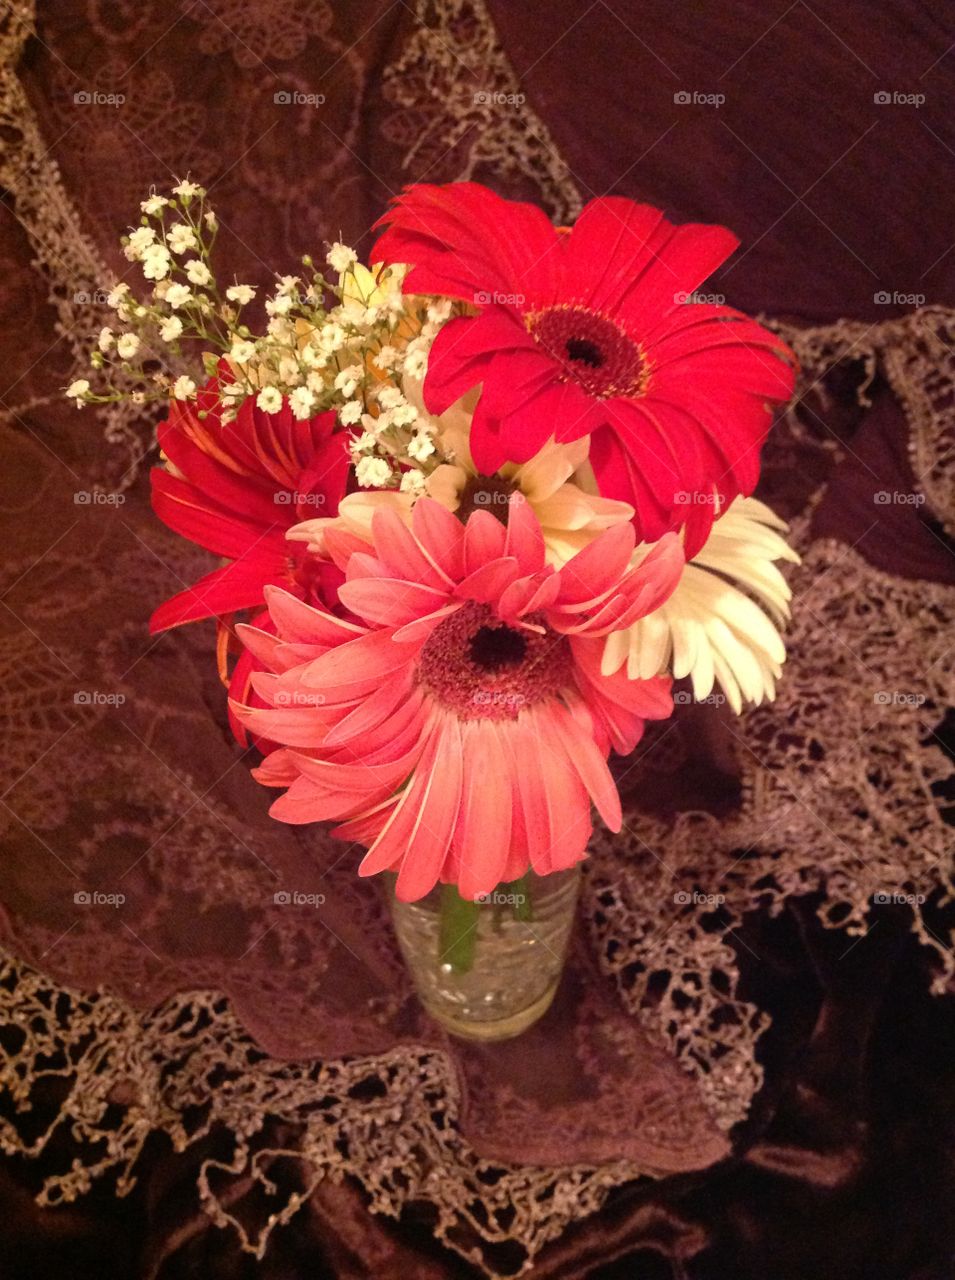 A vivid bouquet of gerbera daisies against a lacy background